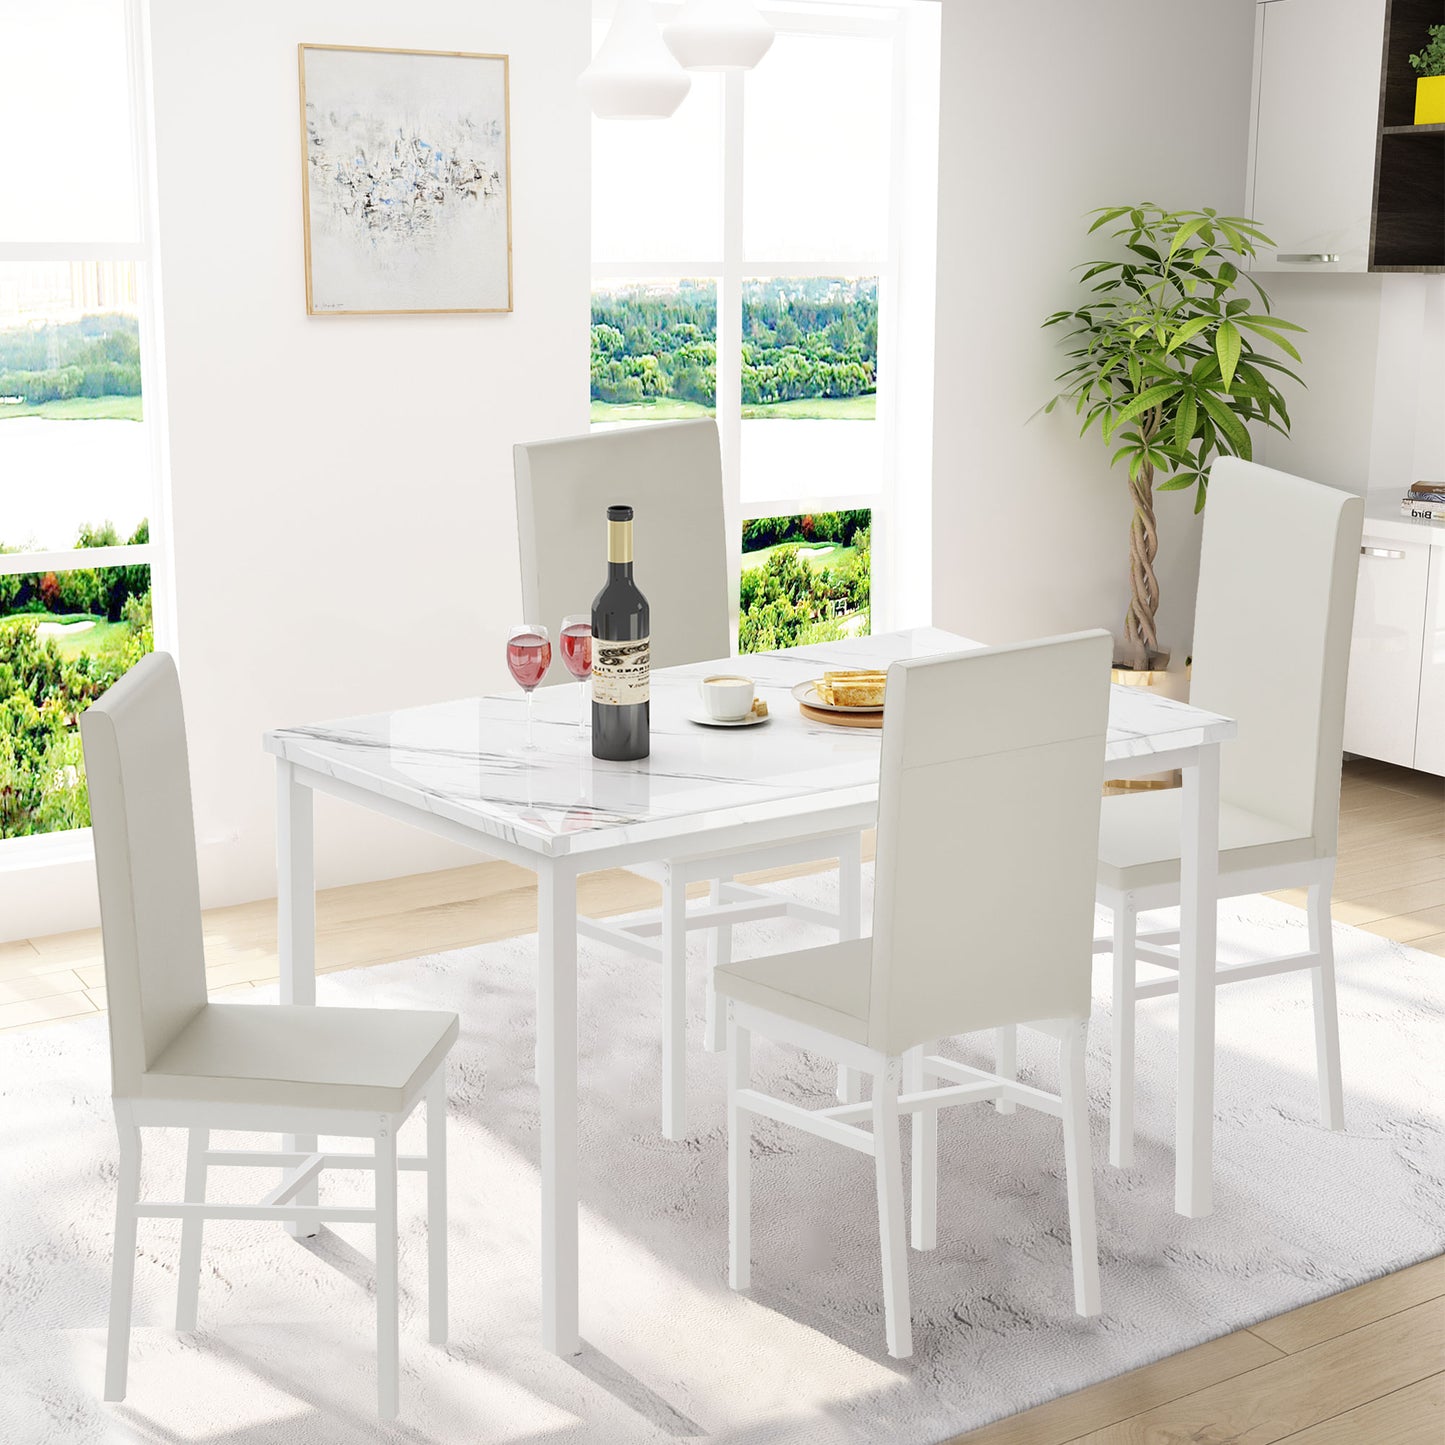 Modern Dining Table Set for 4, SYNGAR Faux Marble Table and PU Leather Upholstered Chairs Set, 5 Piece Kitchen Dining Set, Dining Table and Chairs Set for Small Space, Breakfast Nook, White, D8528